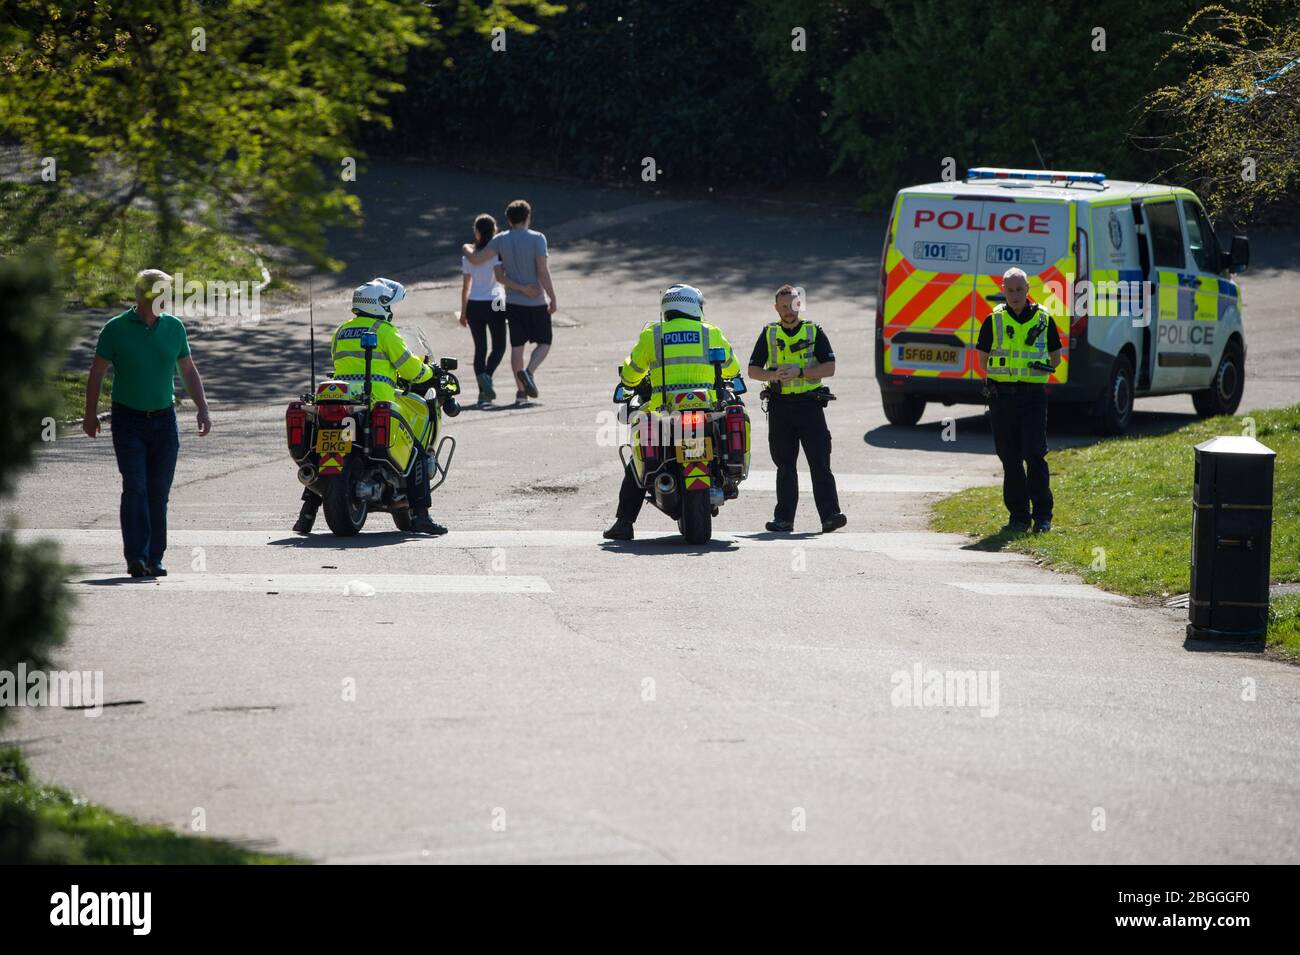 Glasgow, UK. 21st Apr, 2020. Pictured: Scenes from Kelvingrove Park in Glasgow during the coronavirus (COVID-19) lockdown. Credit: Colin Fisher/Alamy Live News Stock Photo